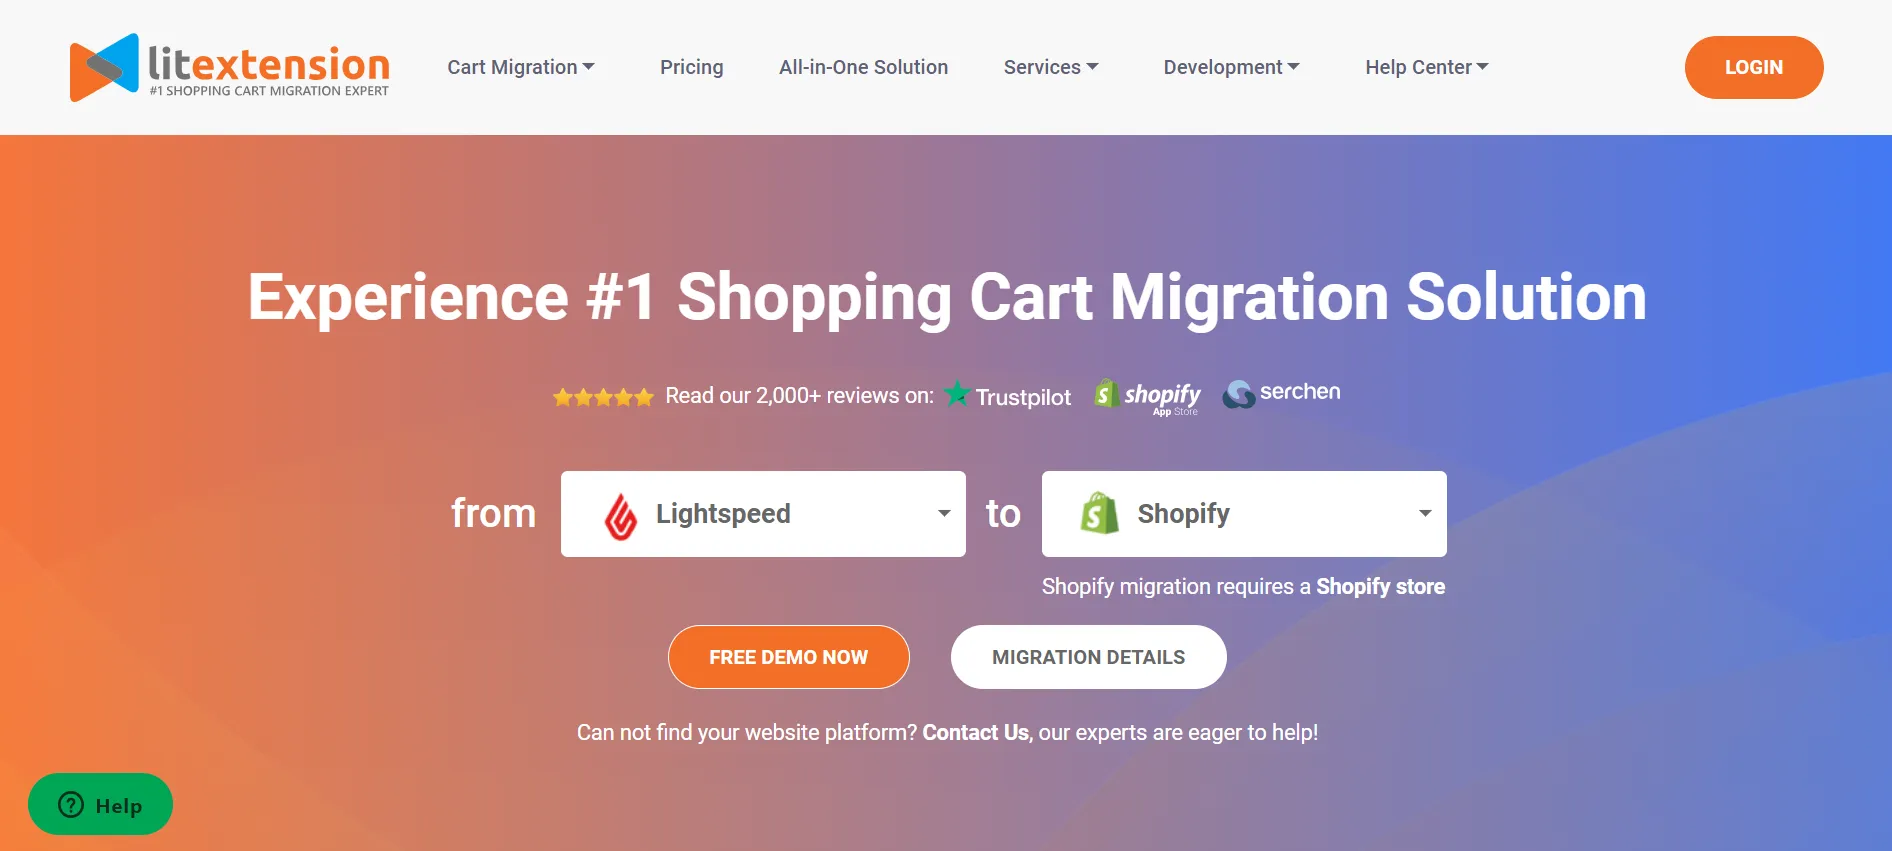 Migrate from Lightspeed to Shopify with LitExtension